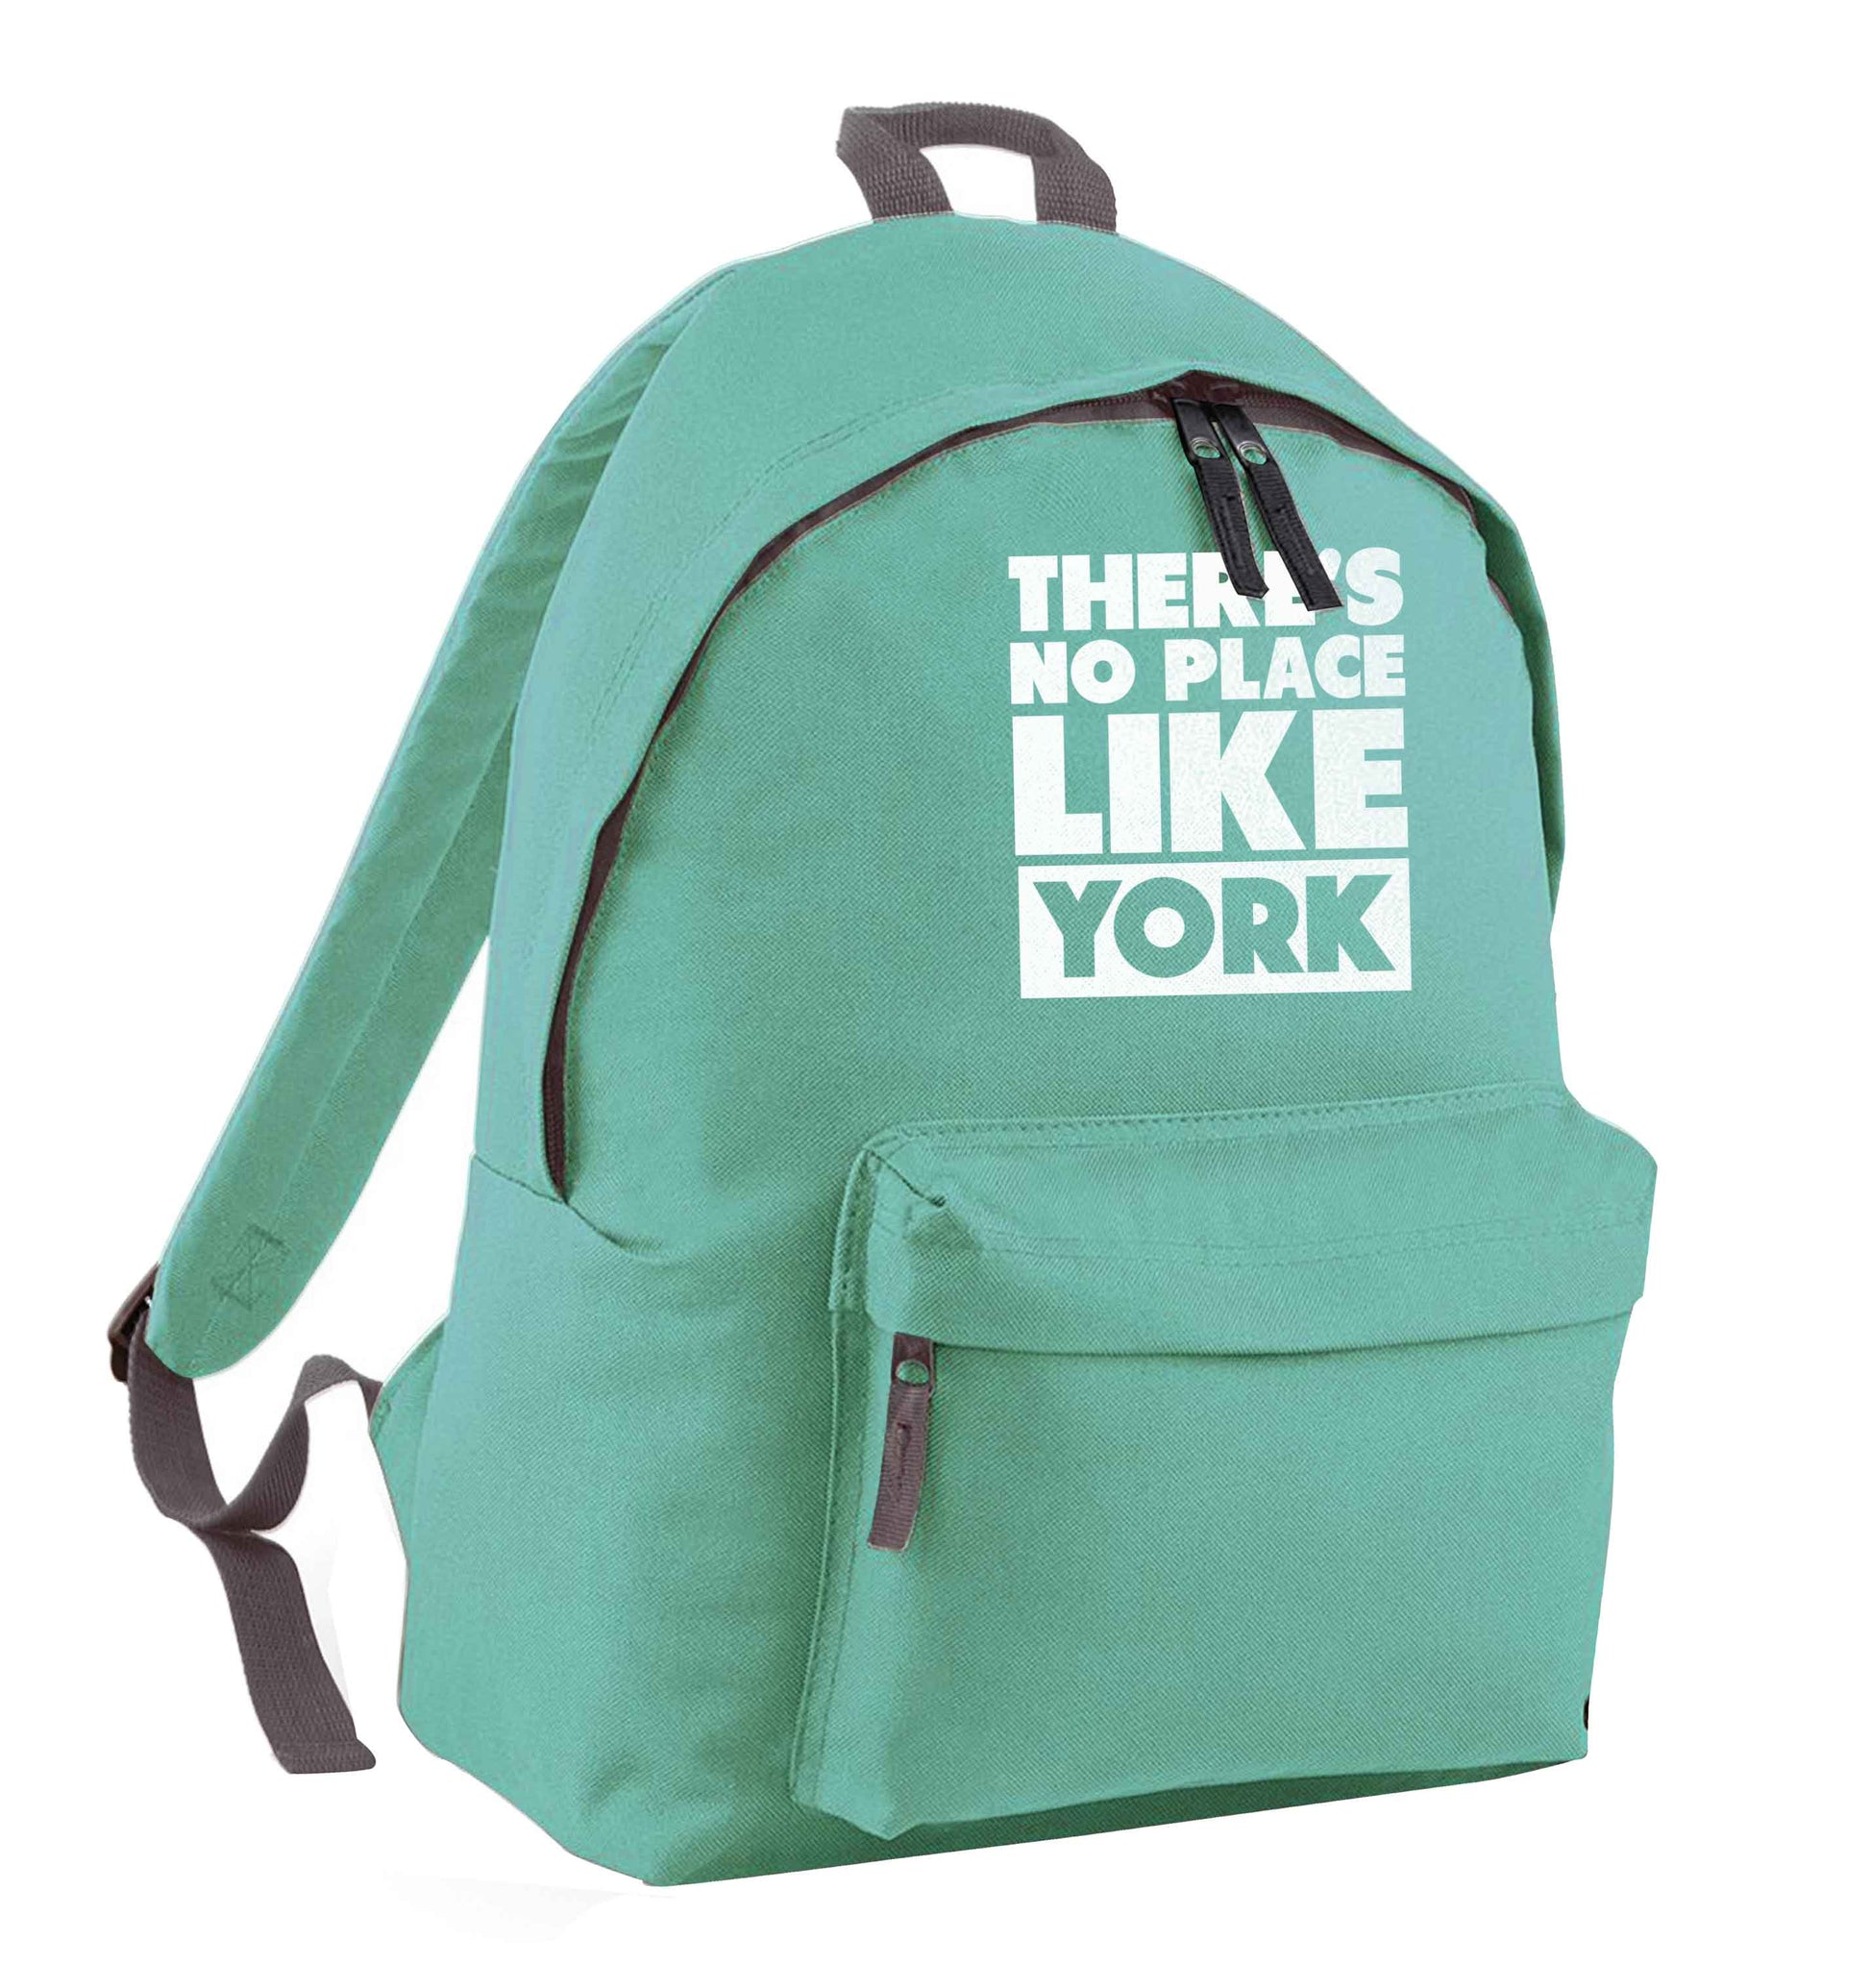 There's no place like york mint adults backpack